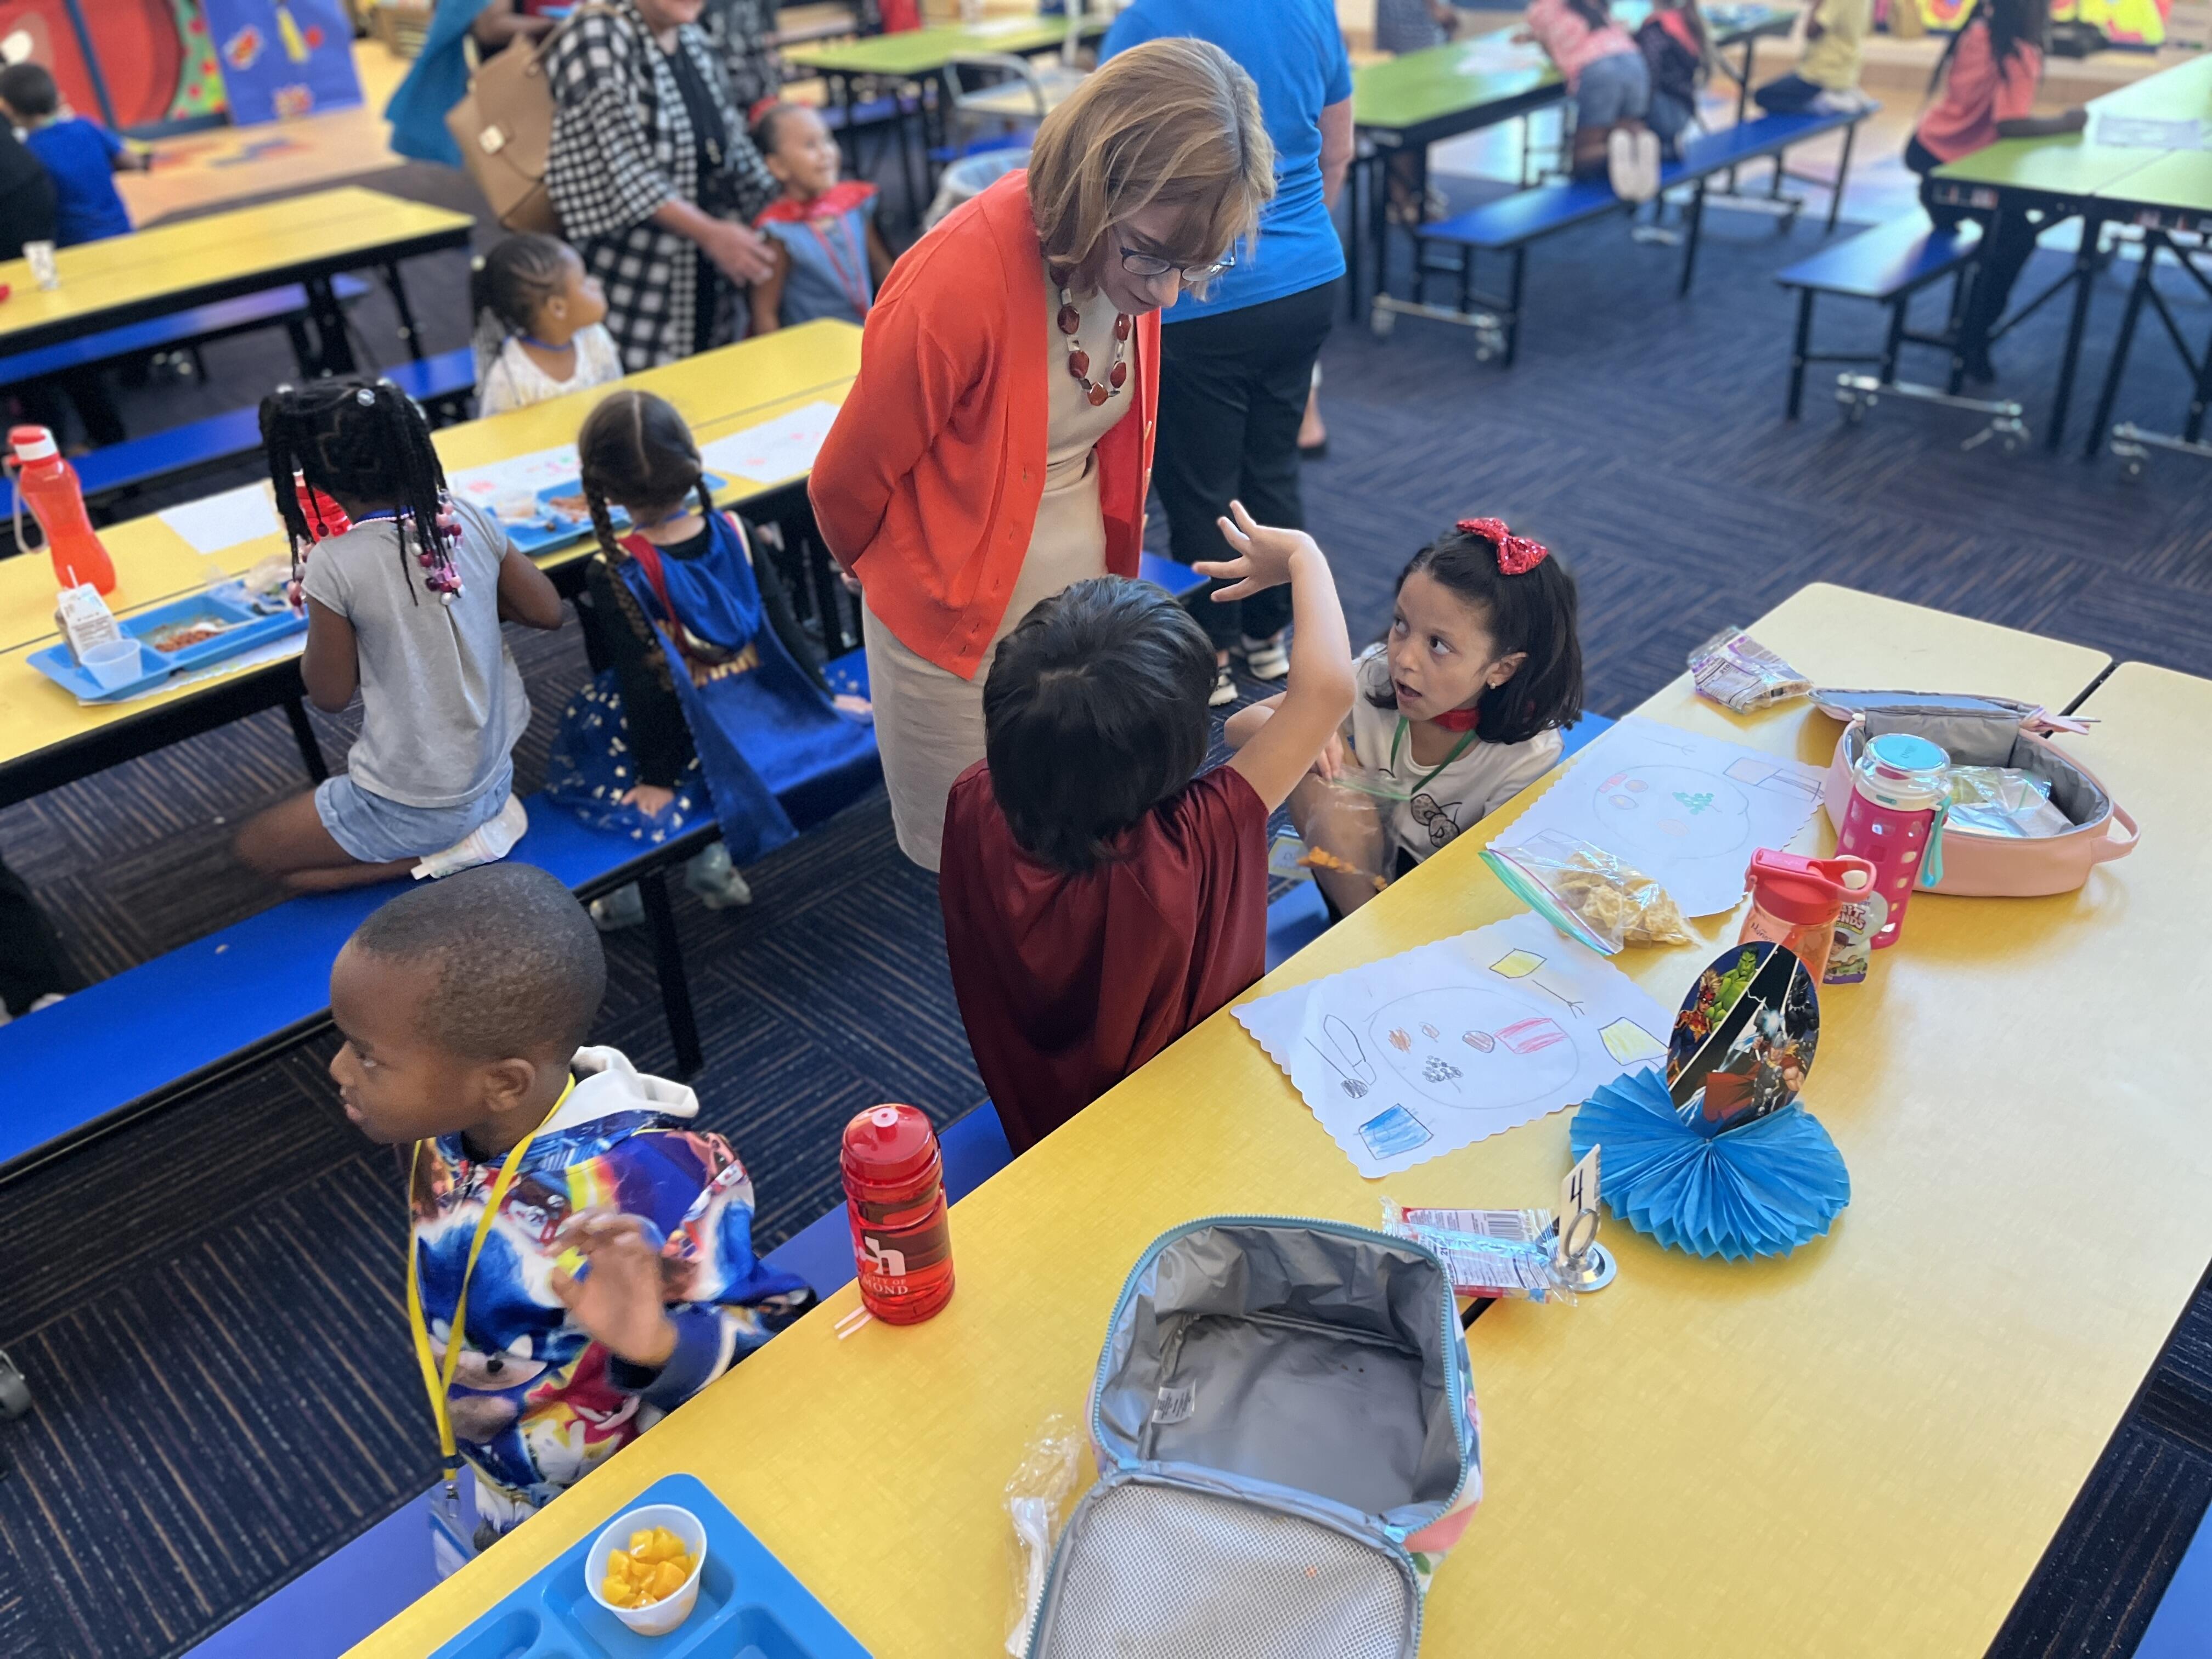 Read More USDA Discusses School Nutrition Policy During Visit to O'Bannon Elementary